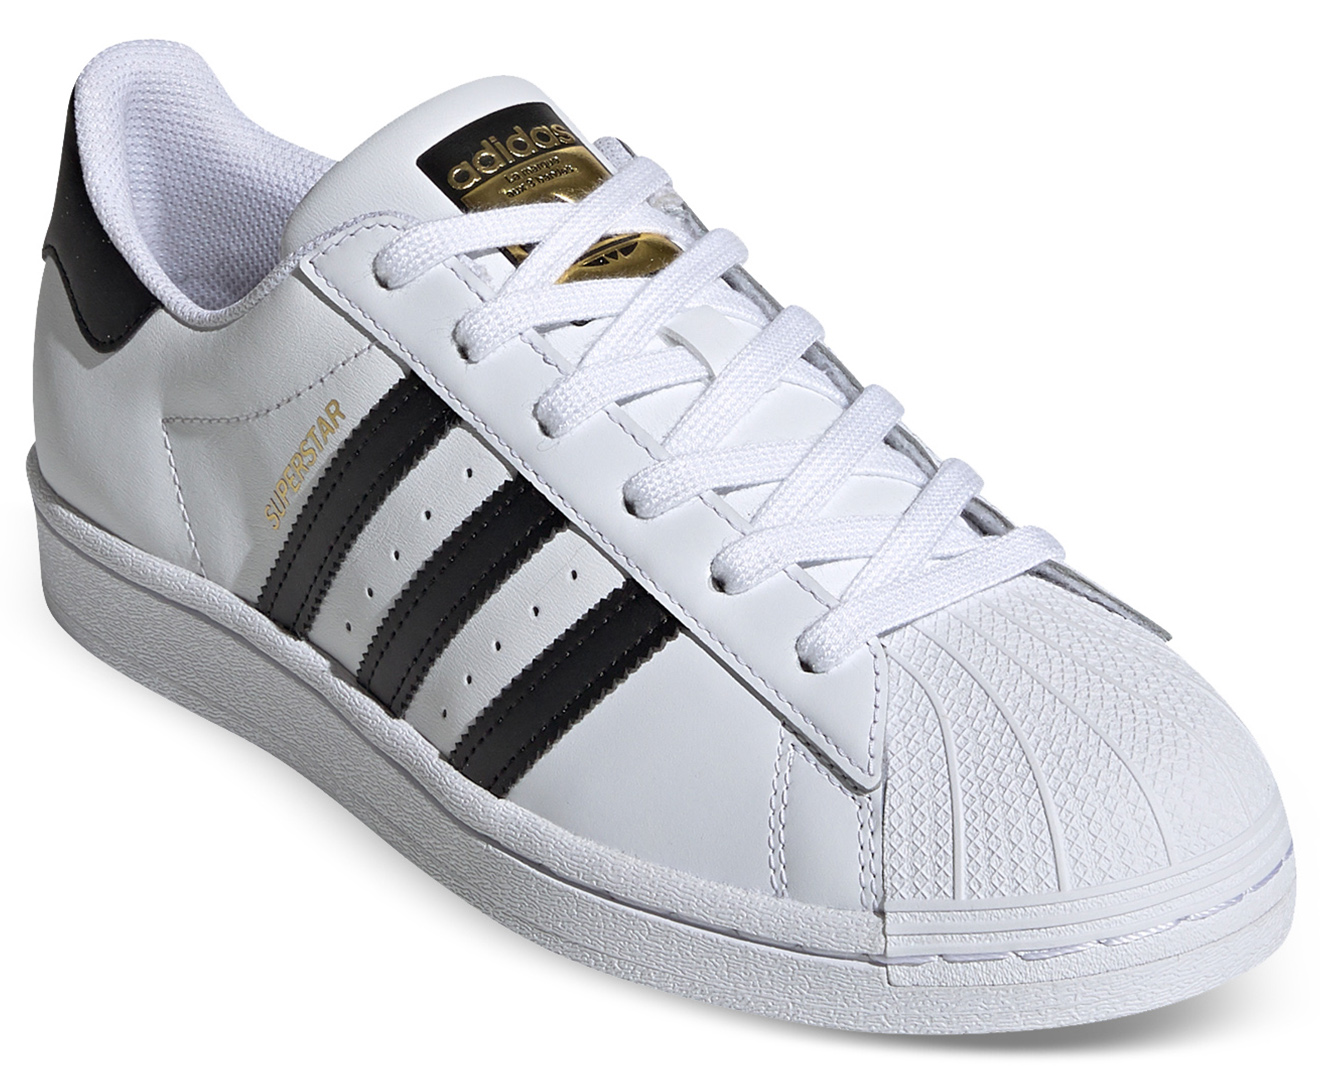 Adidas Originals Women's Superstar Leather Casual Shoes - White/Black ...